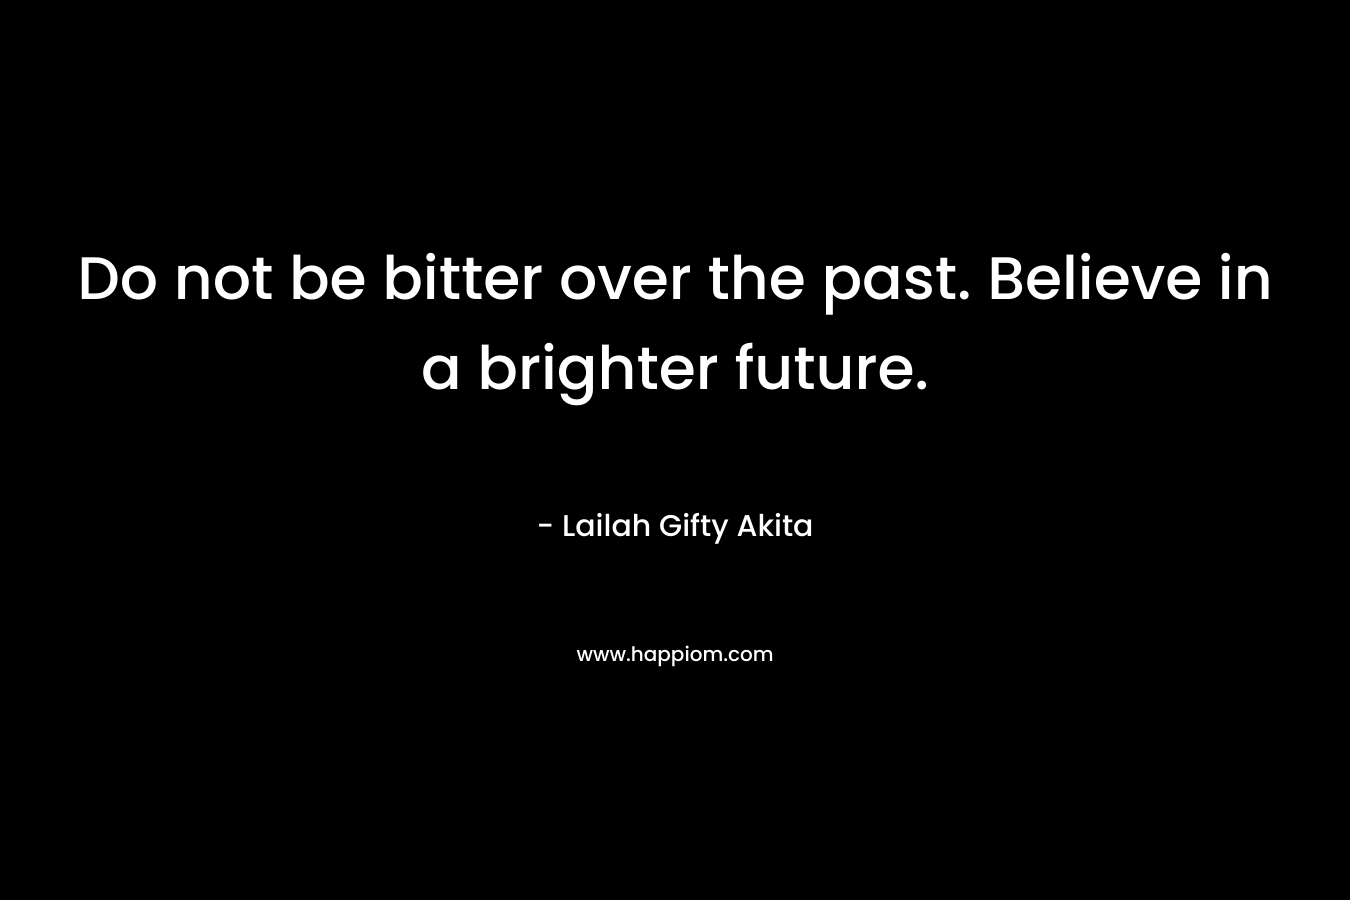 Do not be bitter over the past. Believe in a brighter future.